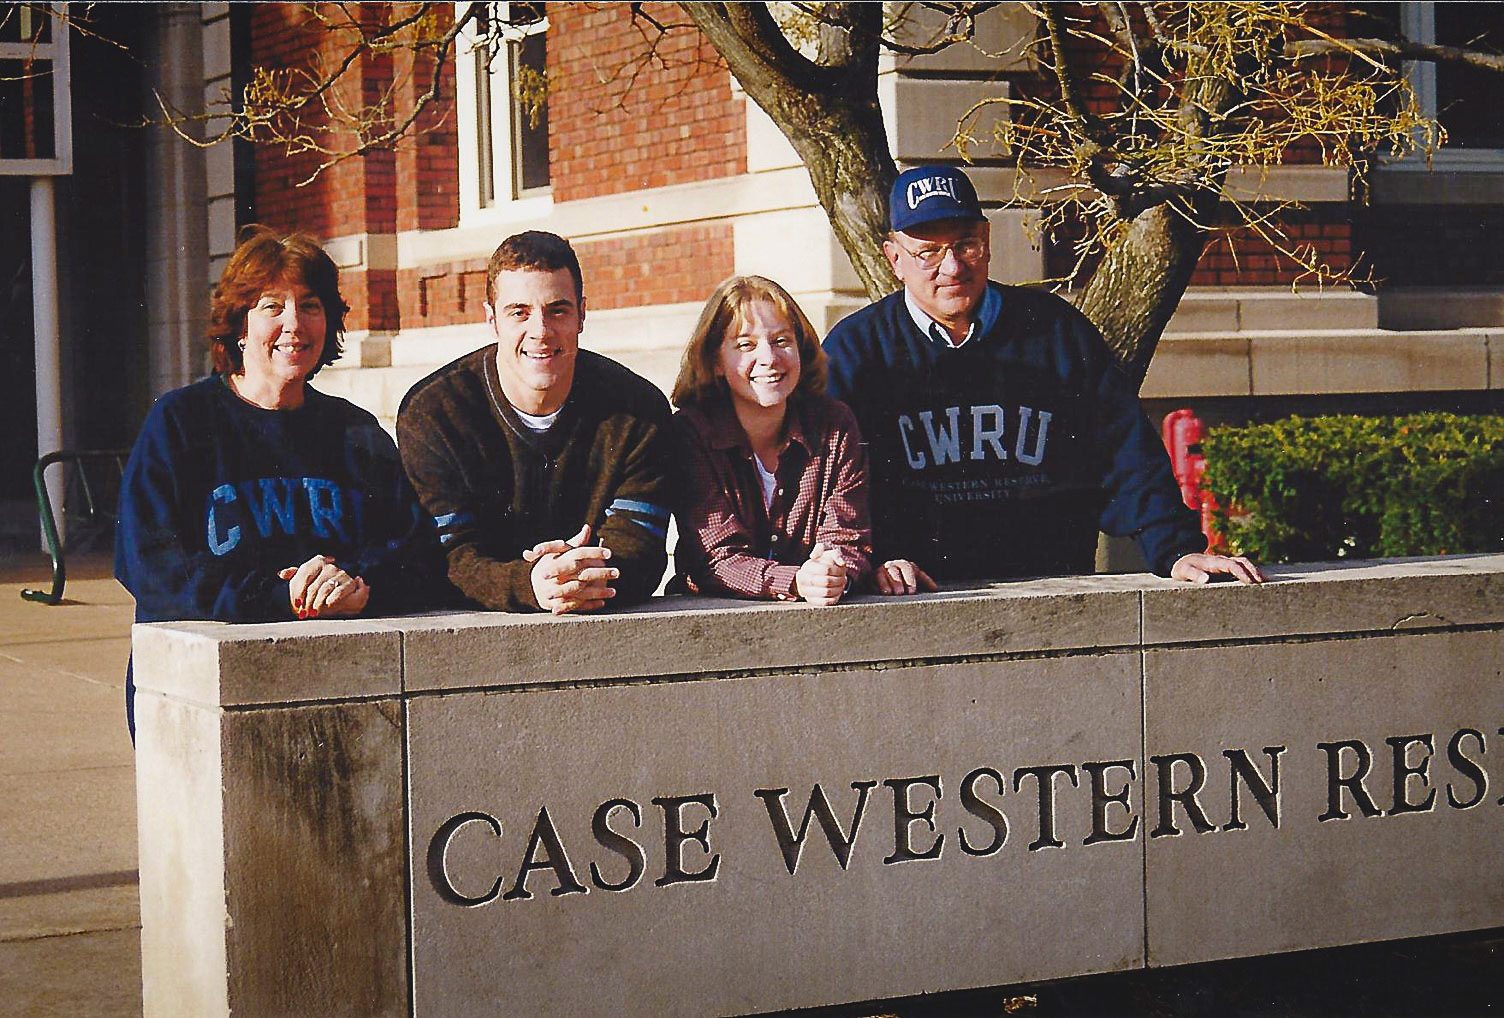 Image of John Kobs standing with his sister and parents behind a CWRU sign